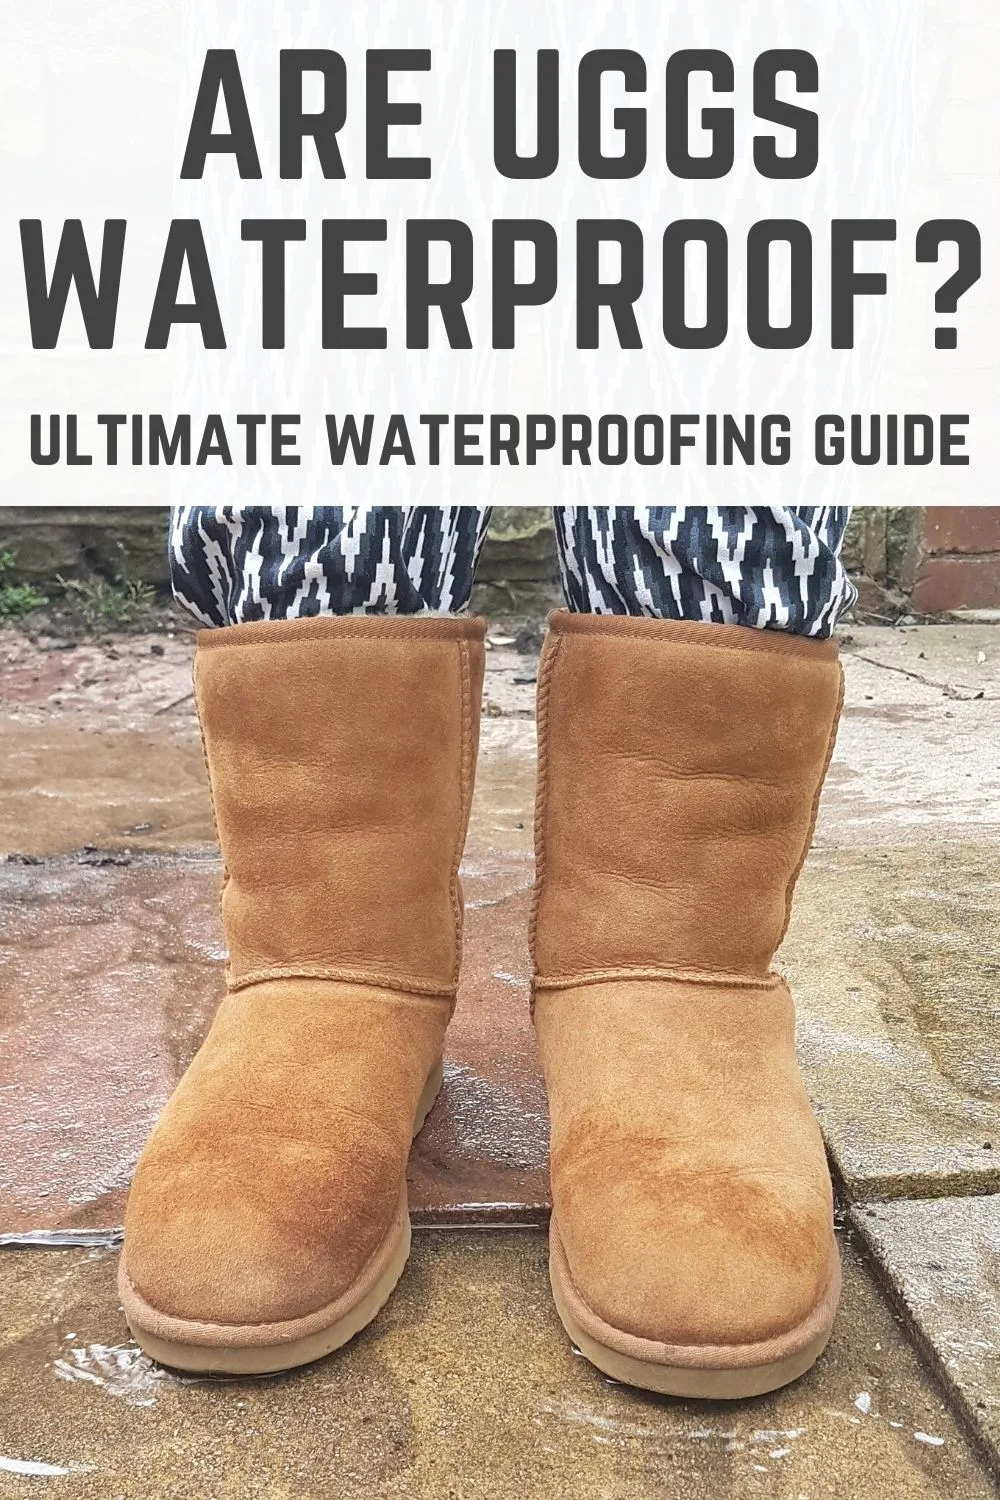 Are Ugg Boots Waterproof